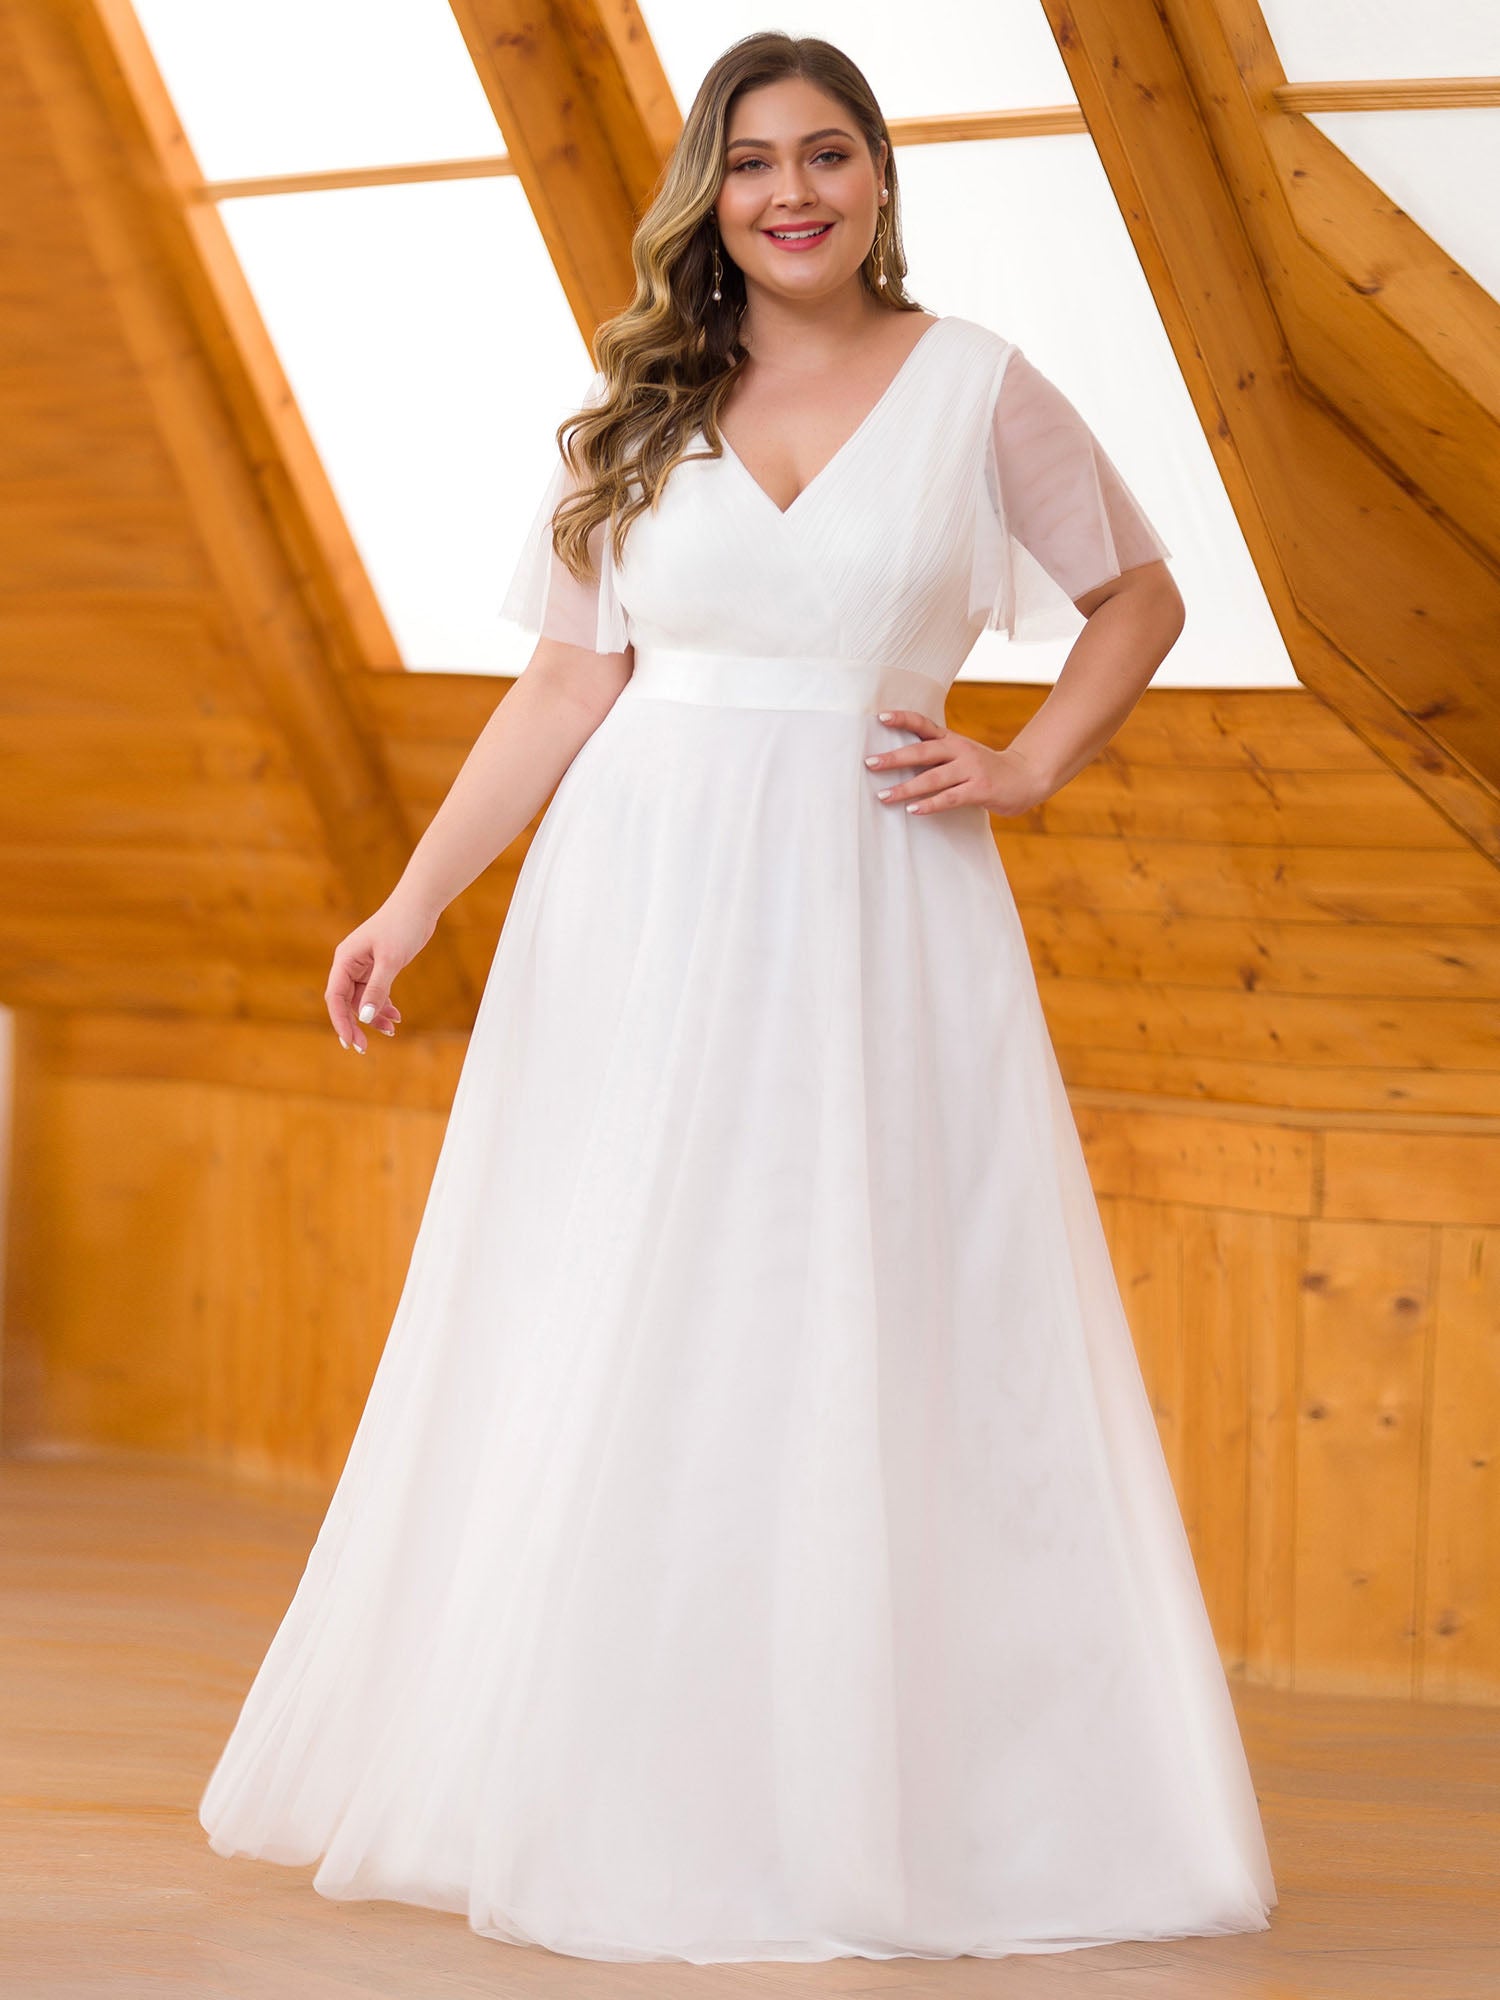 What Are the Most Flattering Wedding Dresses for Plus Size 2023 on Ever Pretty?